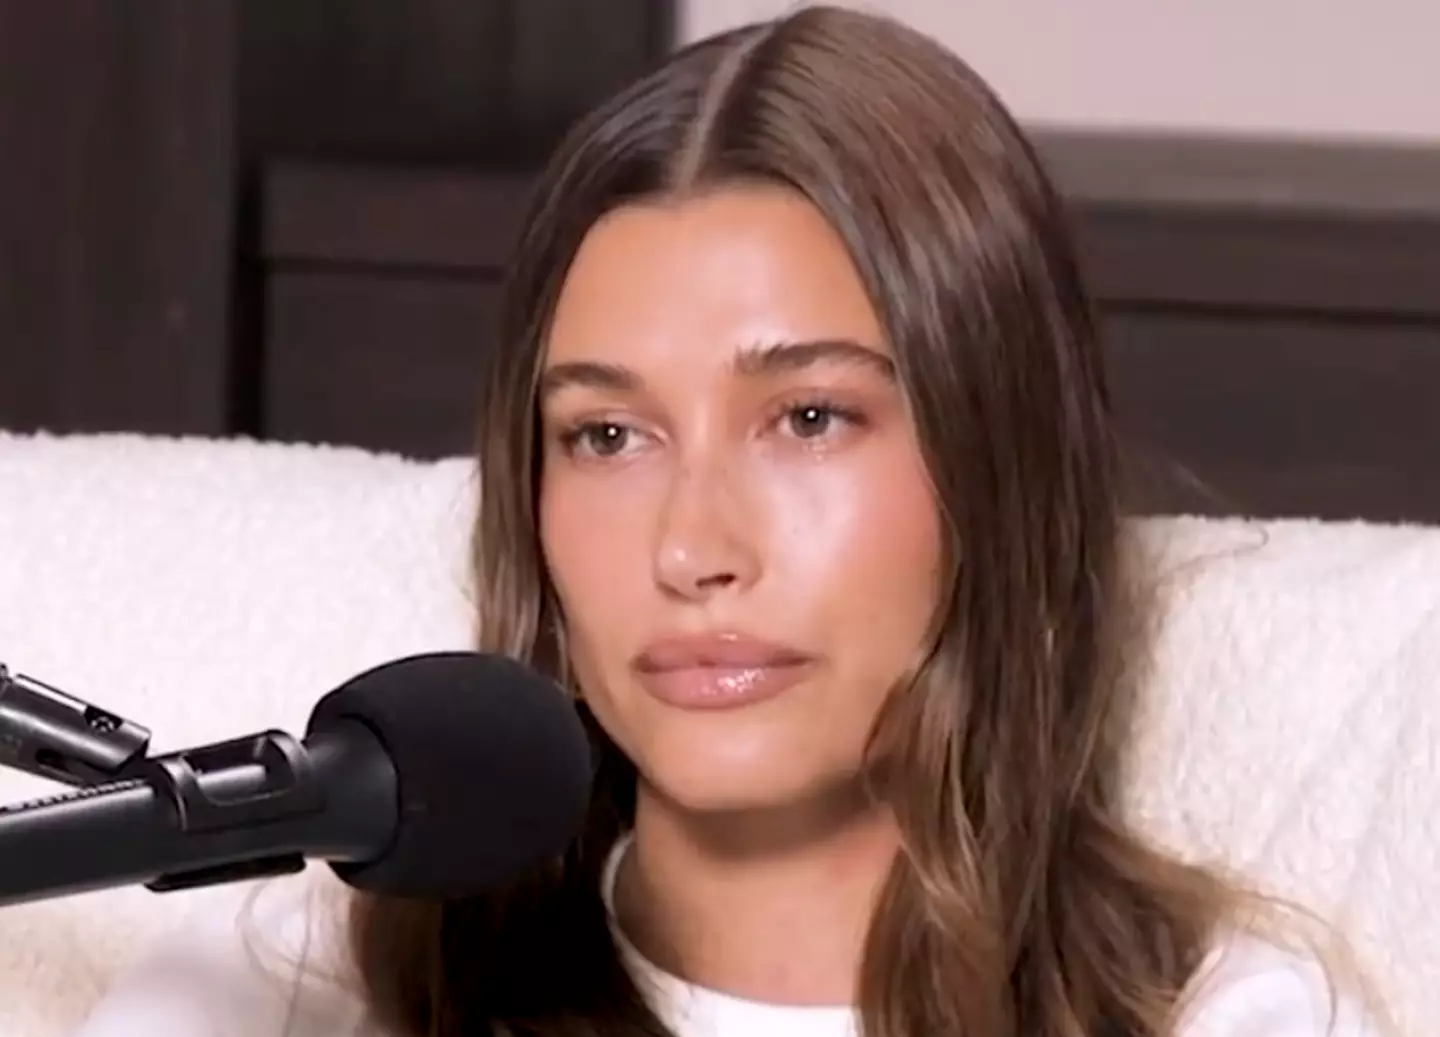 Hailey Bieber spoke out about the 'hurtful' comments on Alex Cooper's podcast, 'Call Her Daddy'.